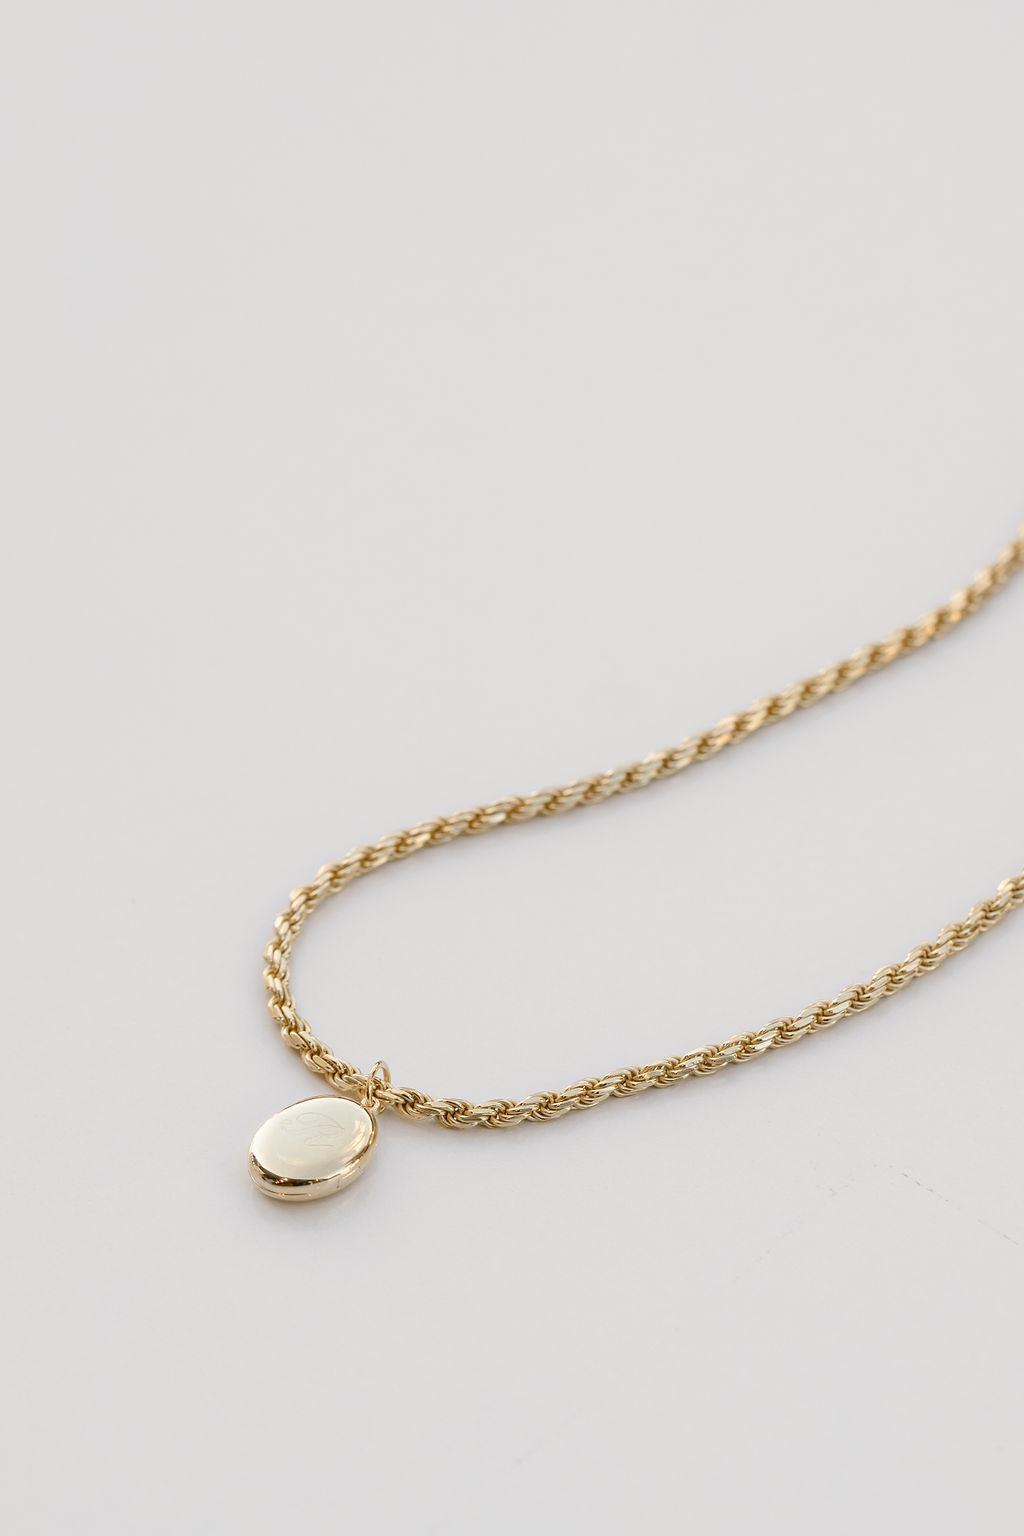 oval locket on gold rope chain